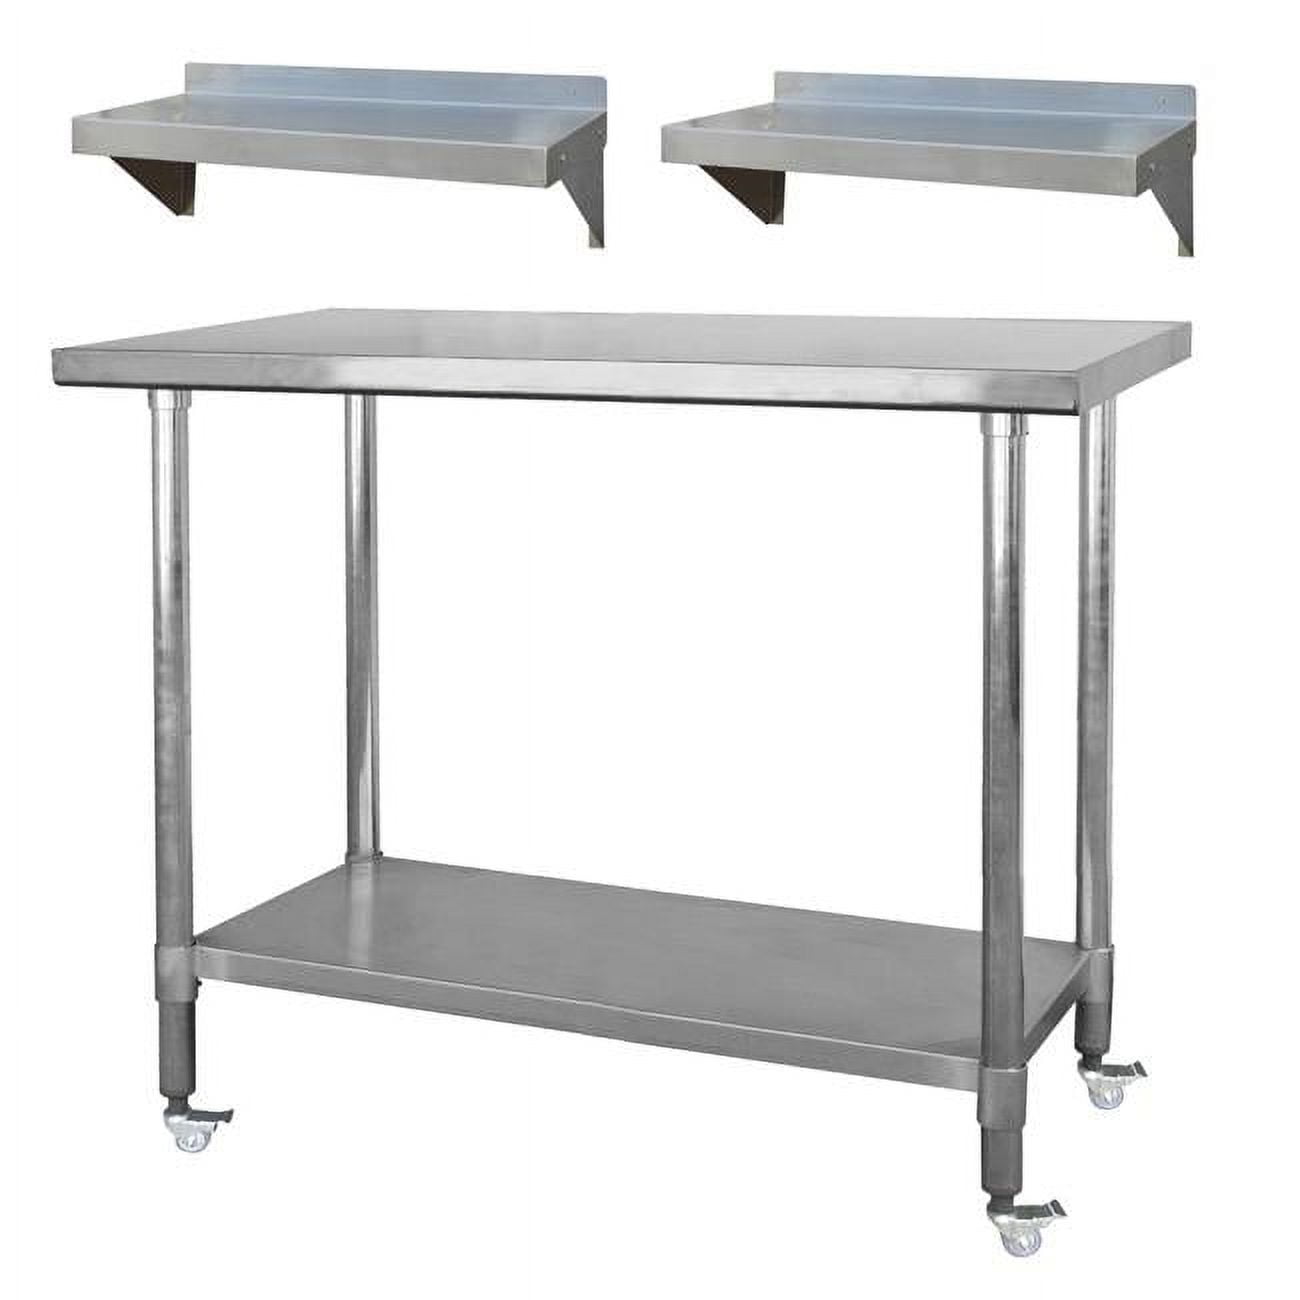 BOOK PUBLISHING COMPANY 48 in. Stainless Steel Work Station with Workbench Table & Casters - Silver